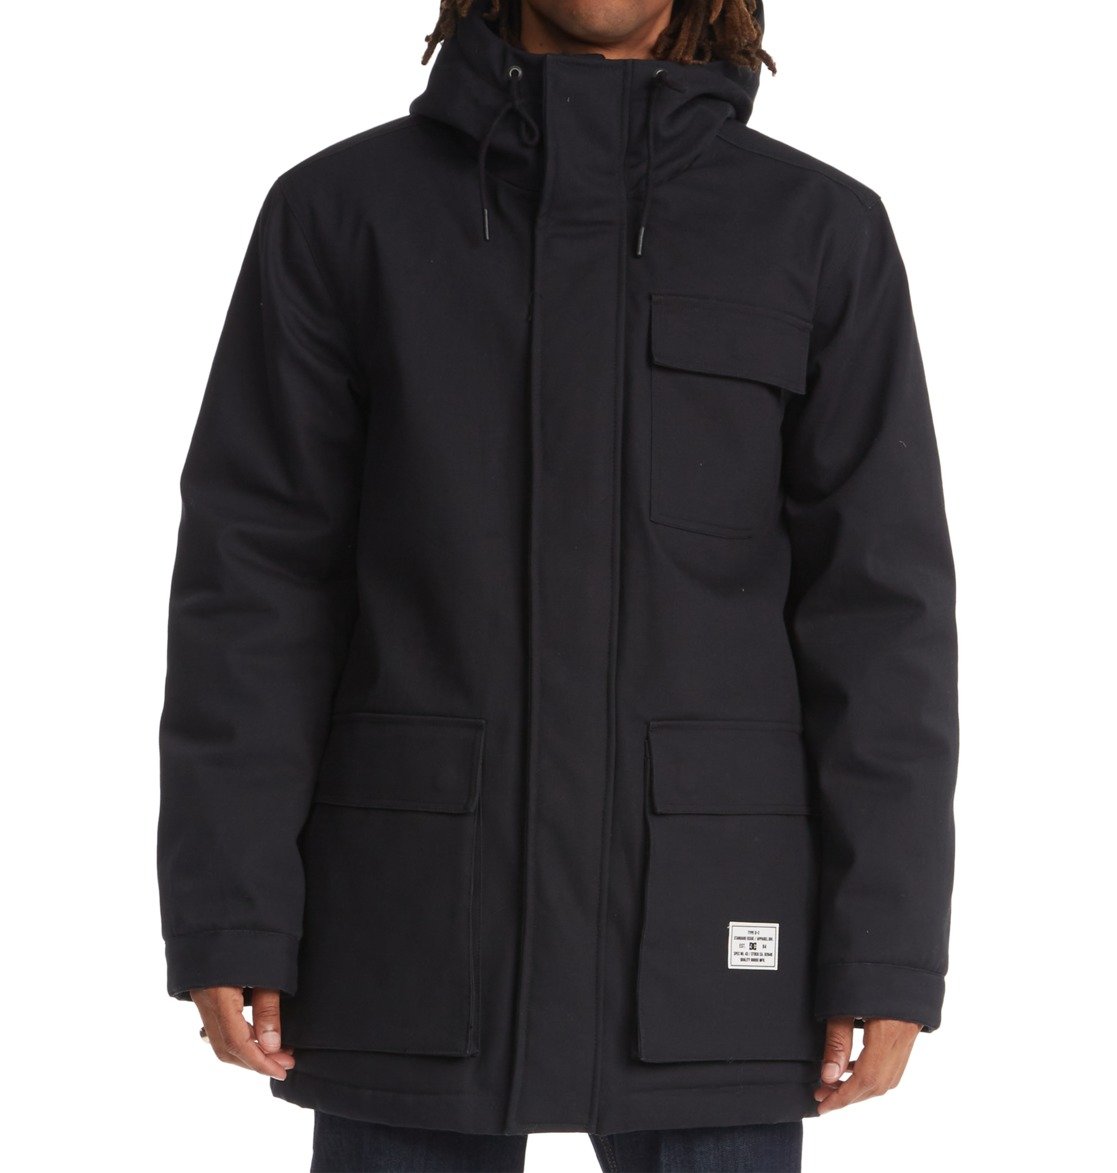 DC Canondale Hooded Jacket